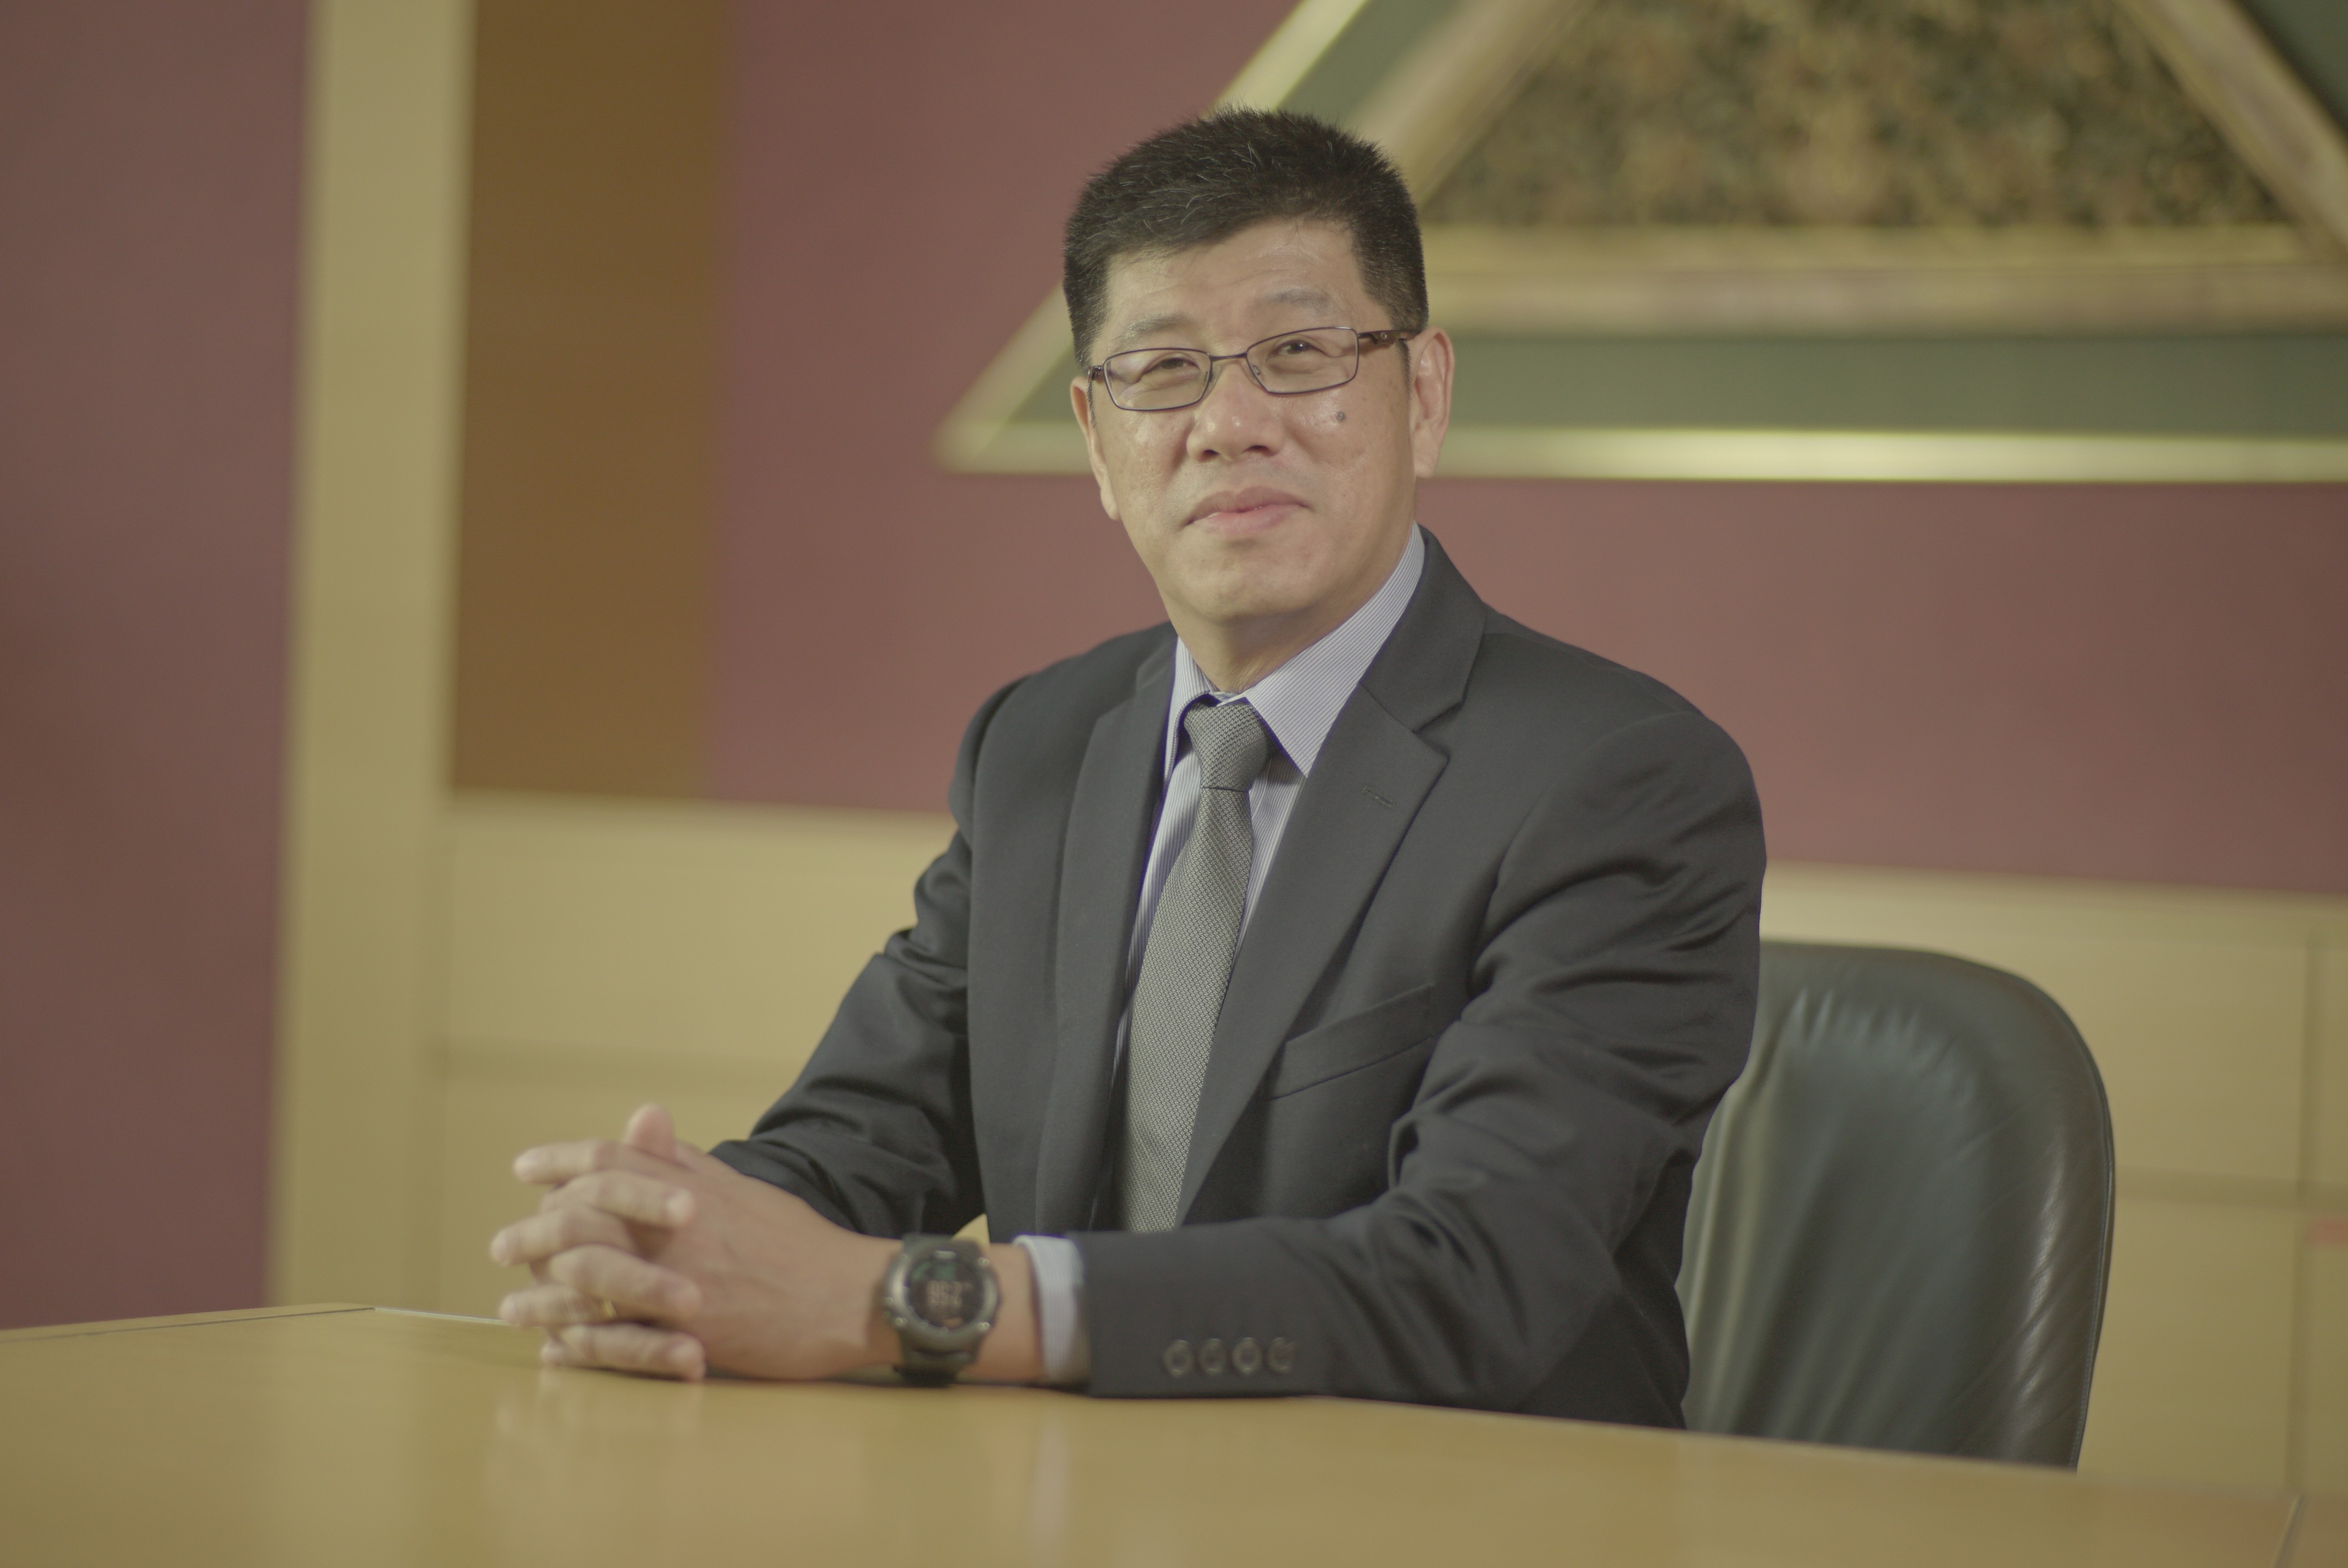 James Lim, executive vice-president and president for Greater Asia